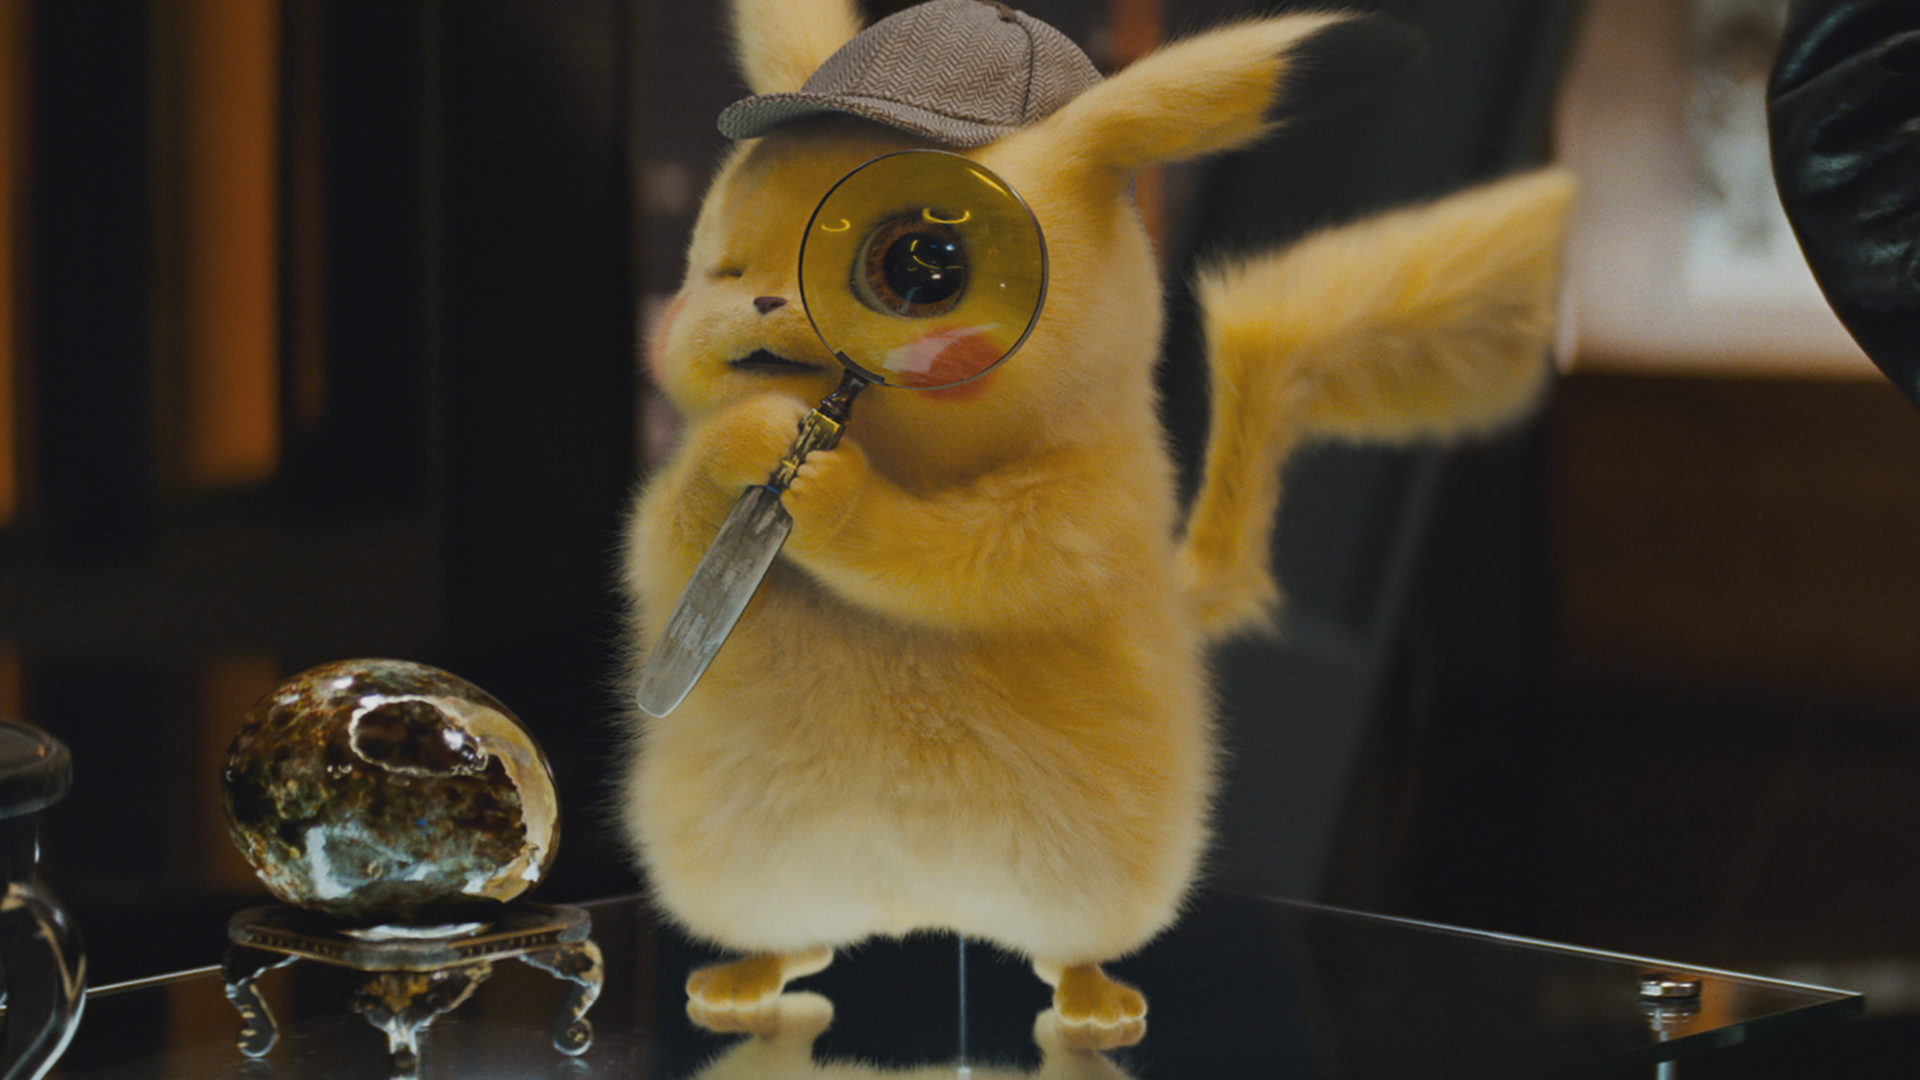 Pokémon takes the big screen in a new live-action movie for the Mother's Day weekend. Director Shawn Hobbs has the latest details, so you know what to watch.